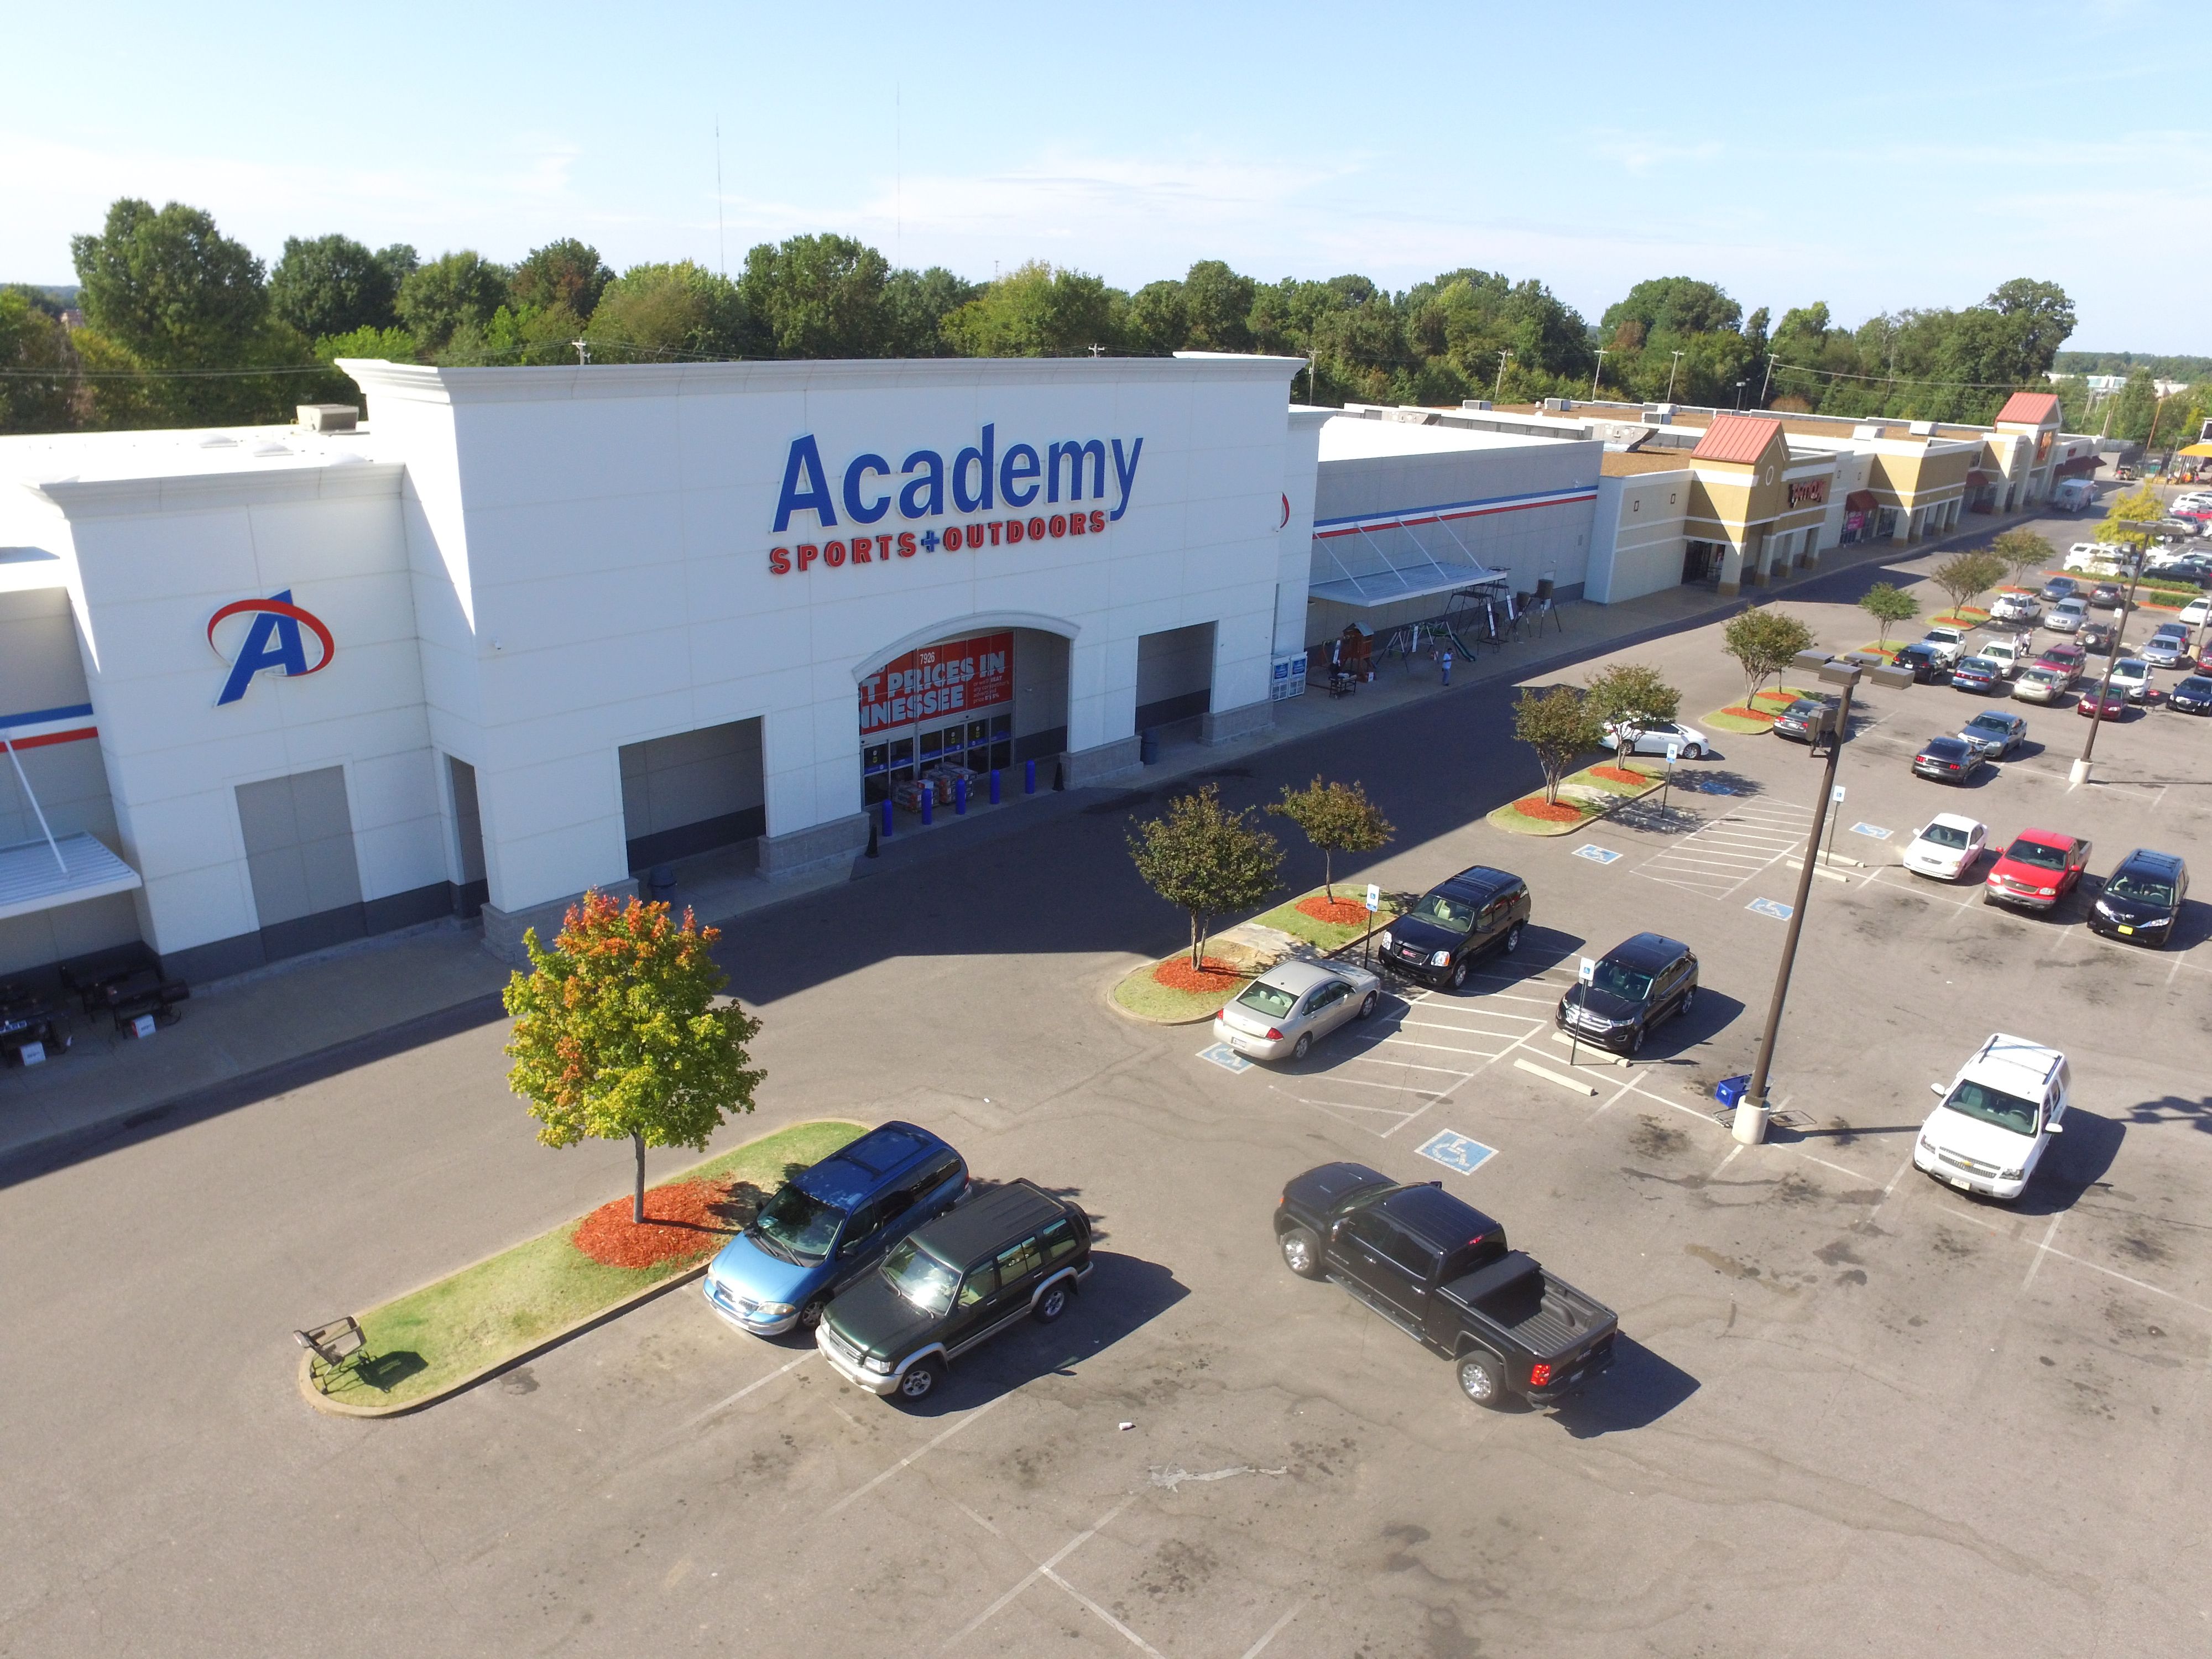 exterior view of academy, sports and outdoors shop with car park